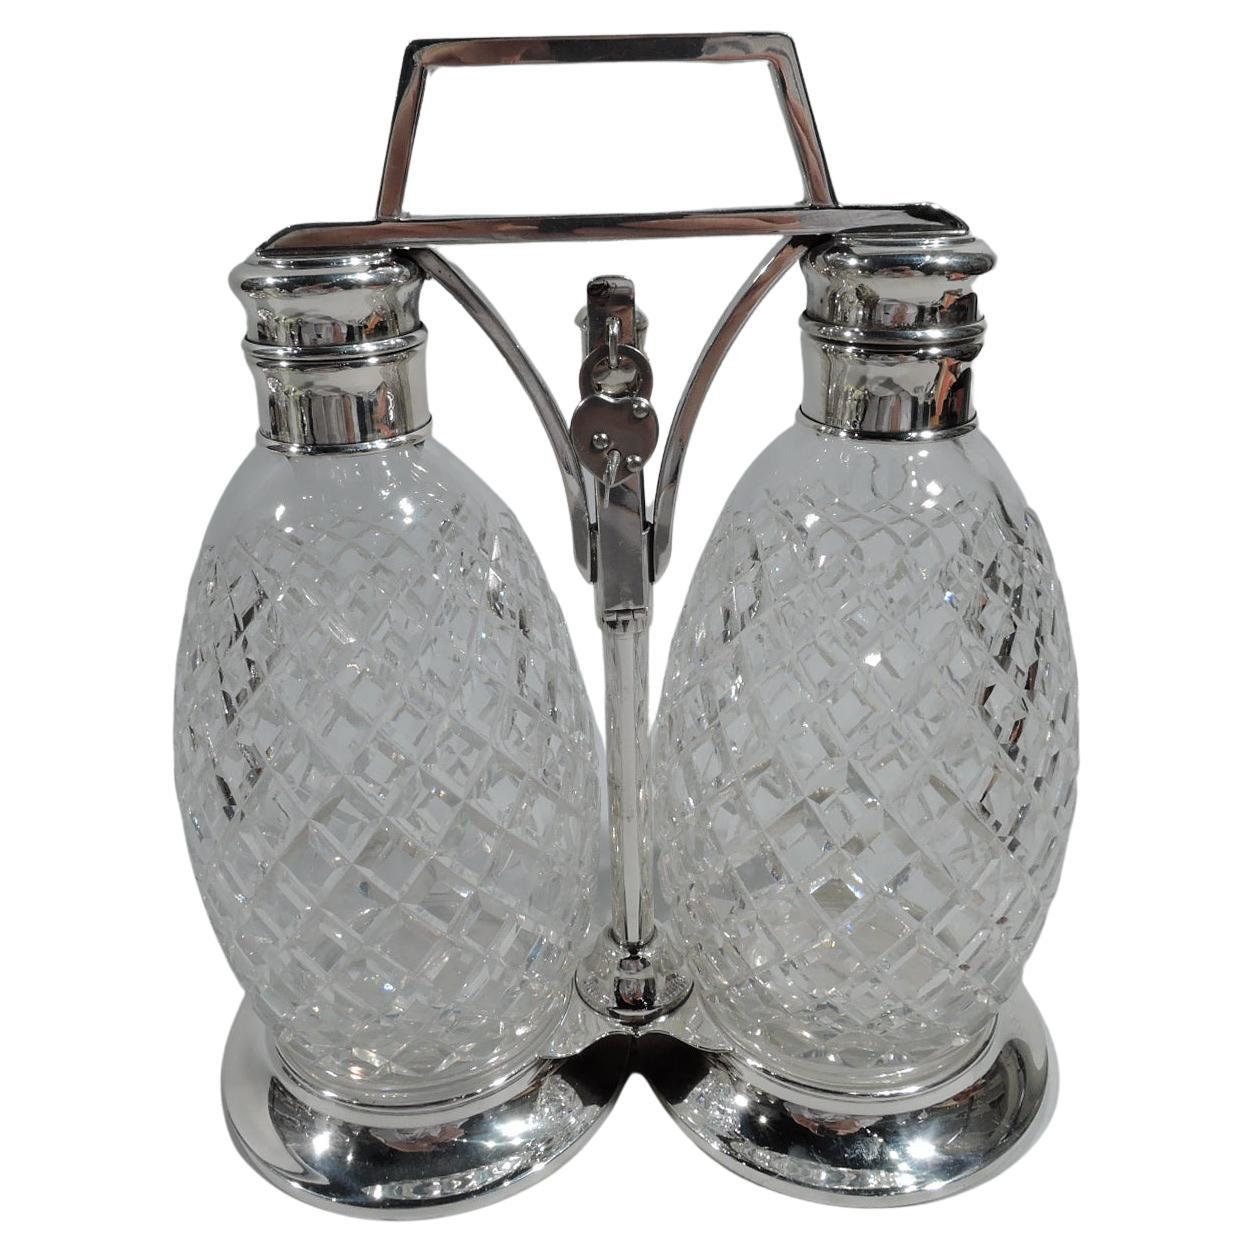 Tiffany Sterling Silver Decanter Set with Hawkes Glass Bottles